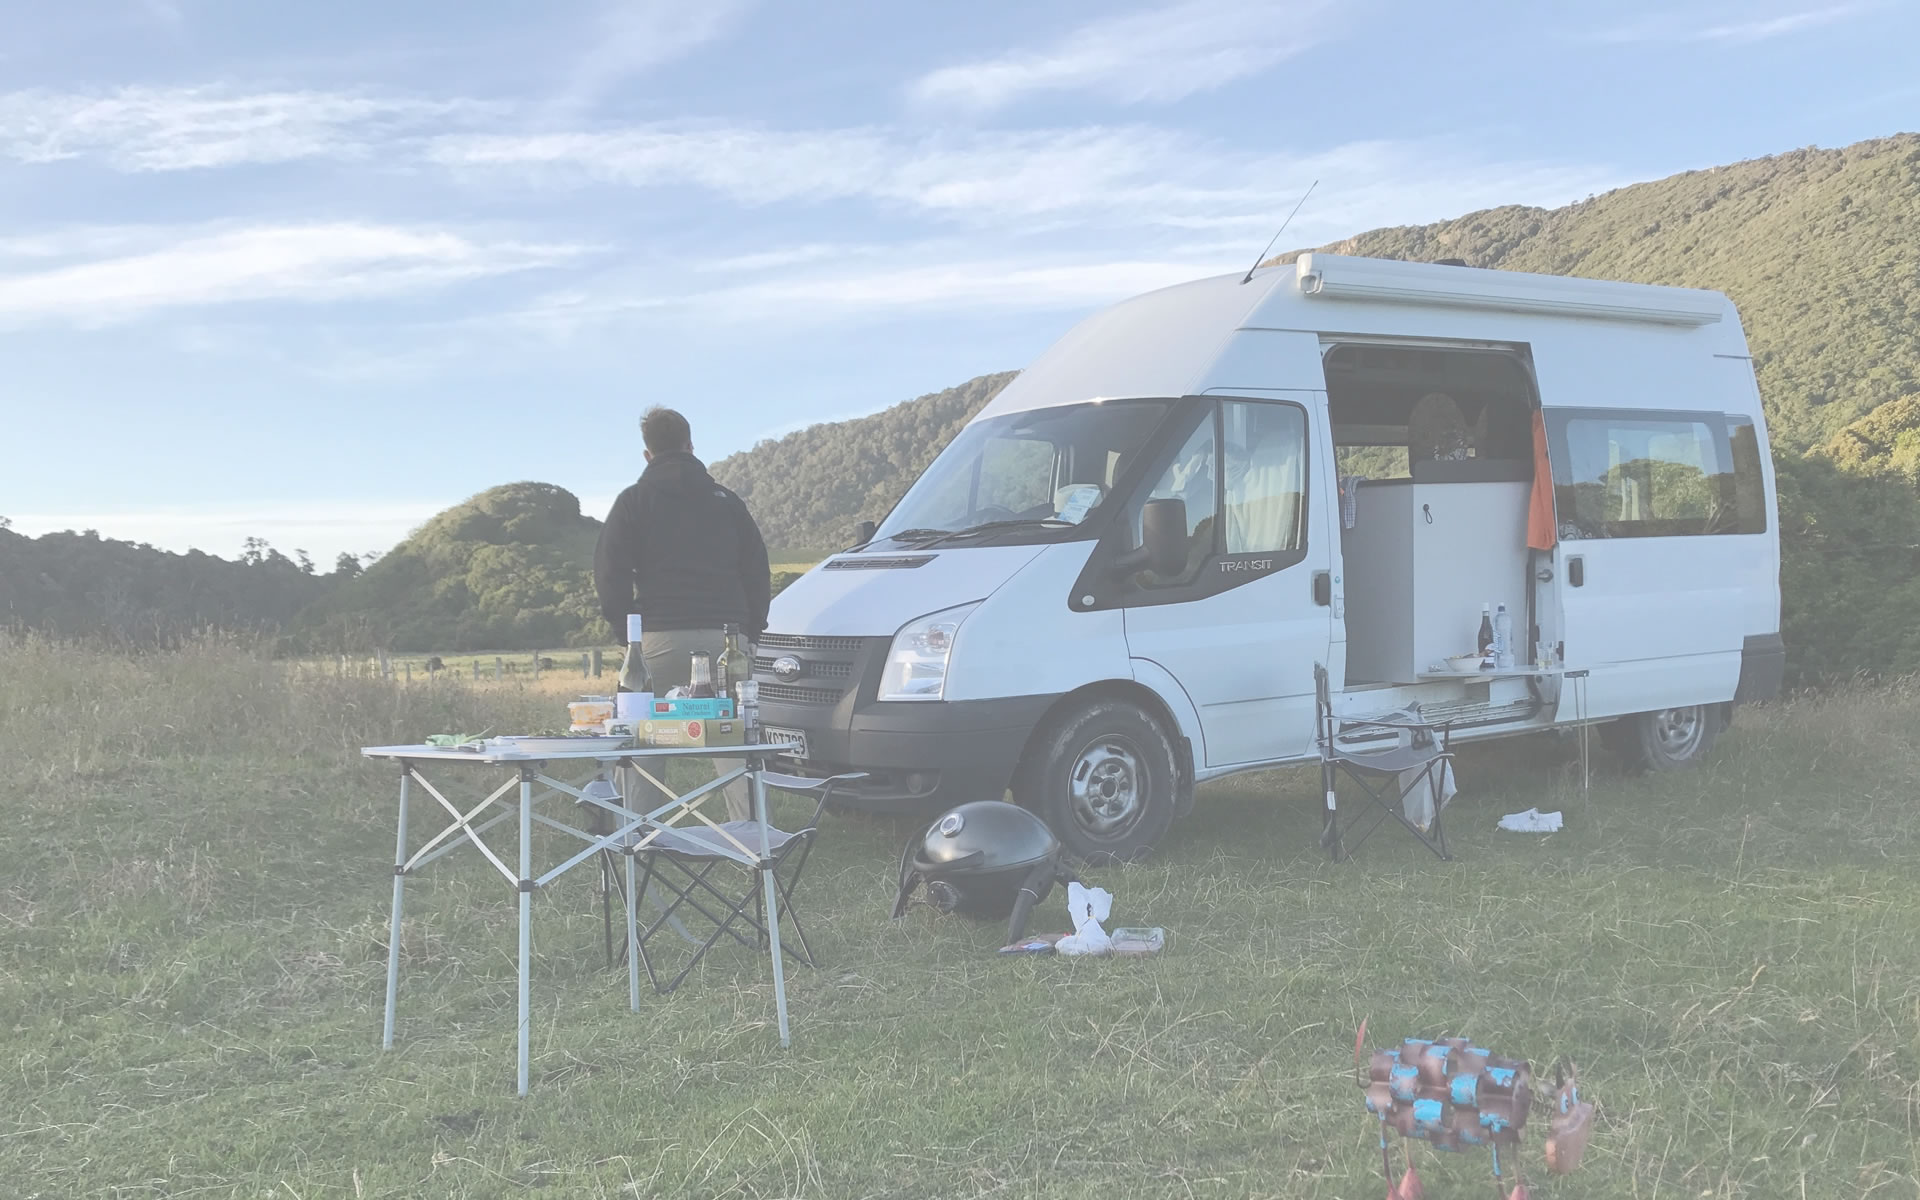 Campervan Hire Christchurch Planning a road-trip to Christchurch, NZ? CamperCo campervans are fully equipped with everything you need to see the beauty of New Zealand hassle free. Website: https://www.camperco.co.nz/ by Camperco